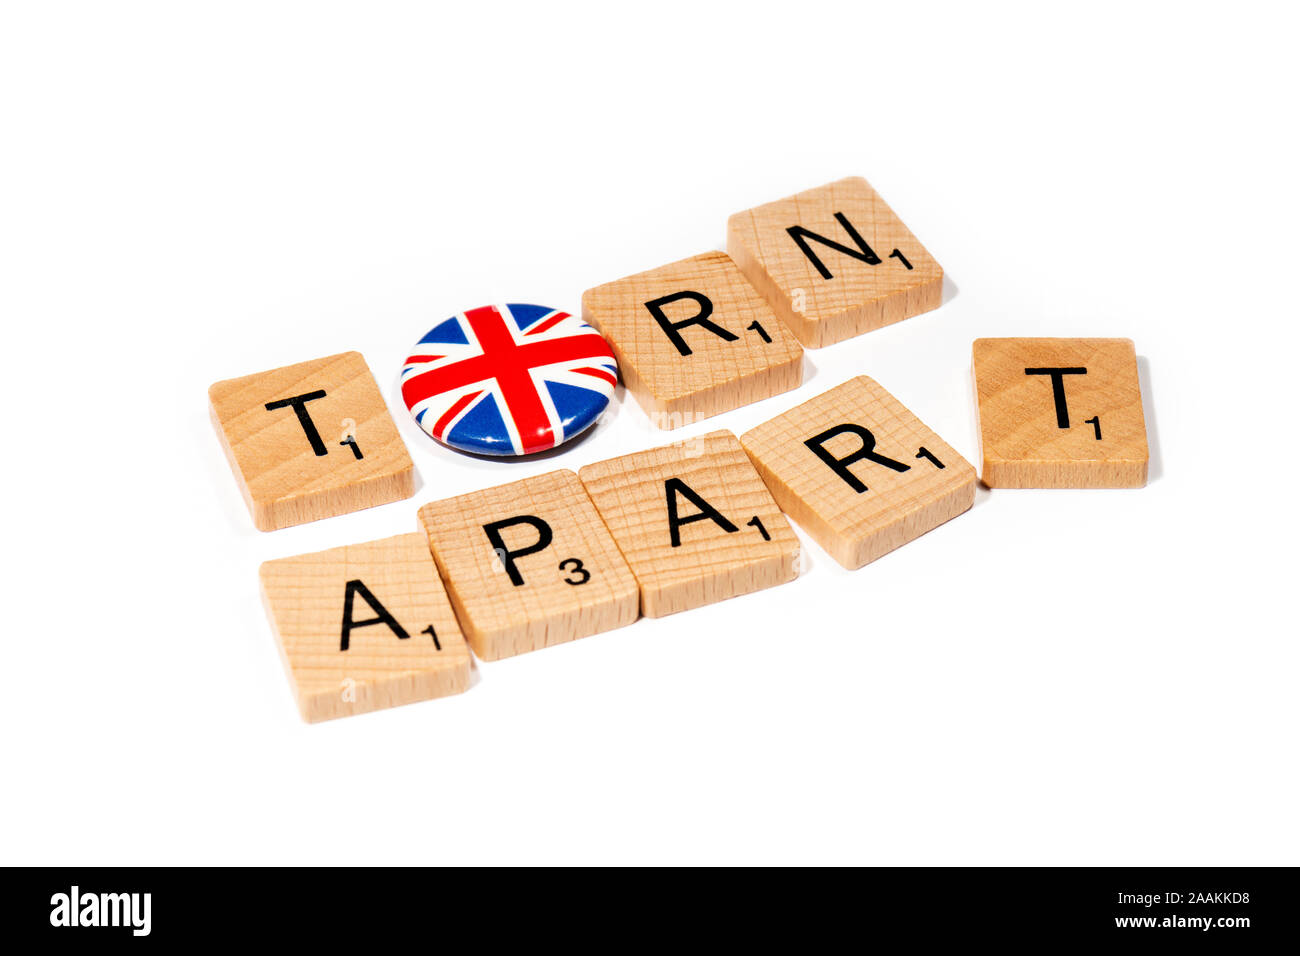 Conceptual: Scrabble letters spell out TORN APART with a Union Flag pin badge as the O. Stock Photo